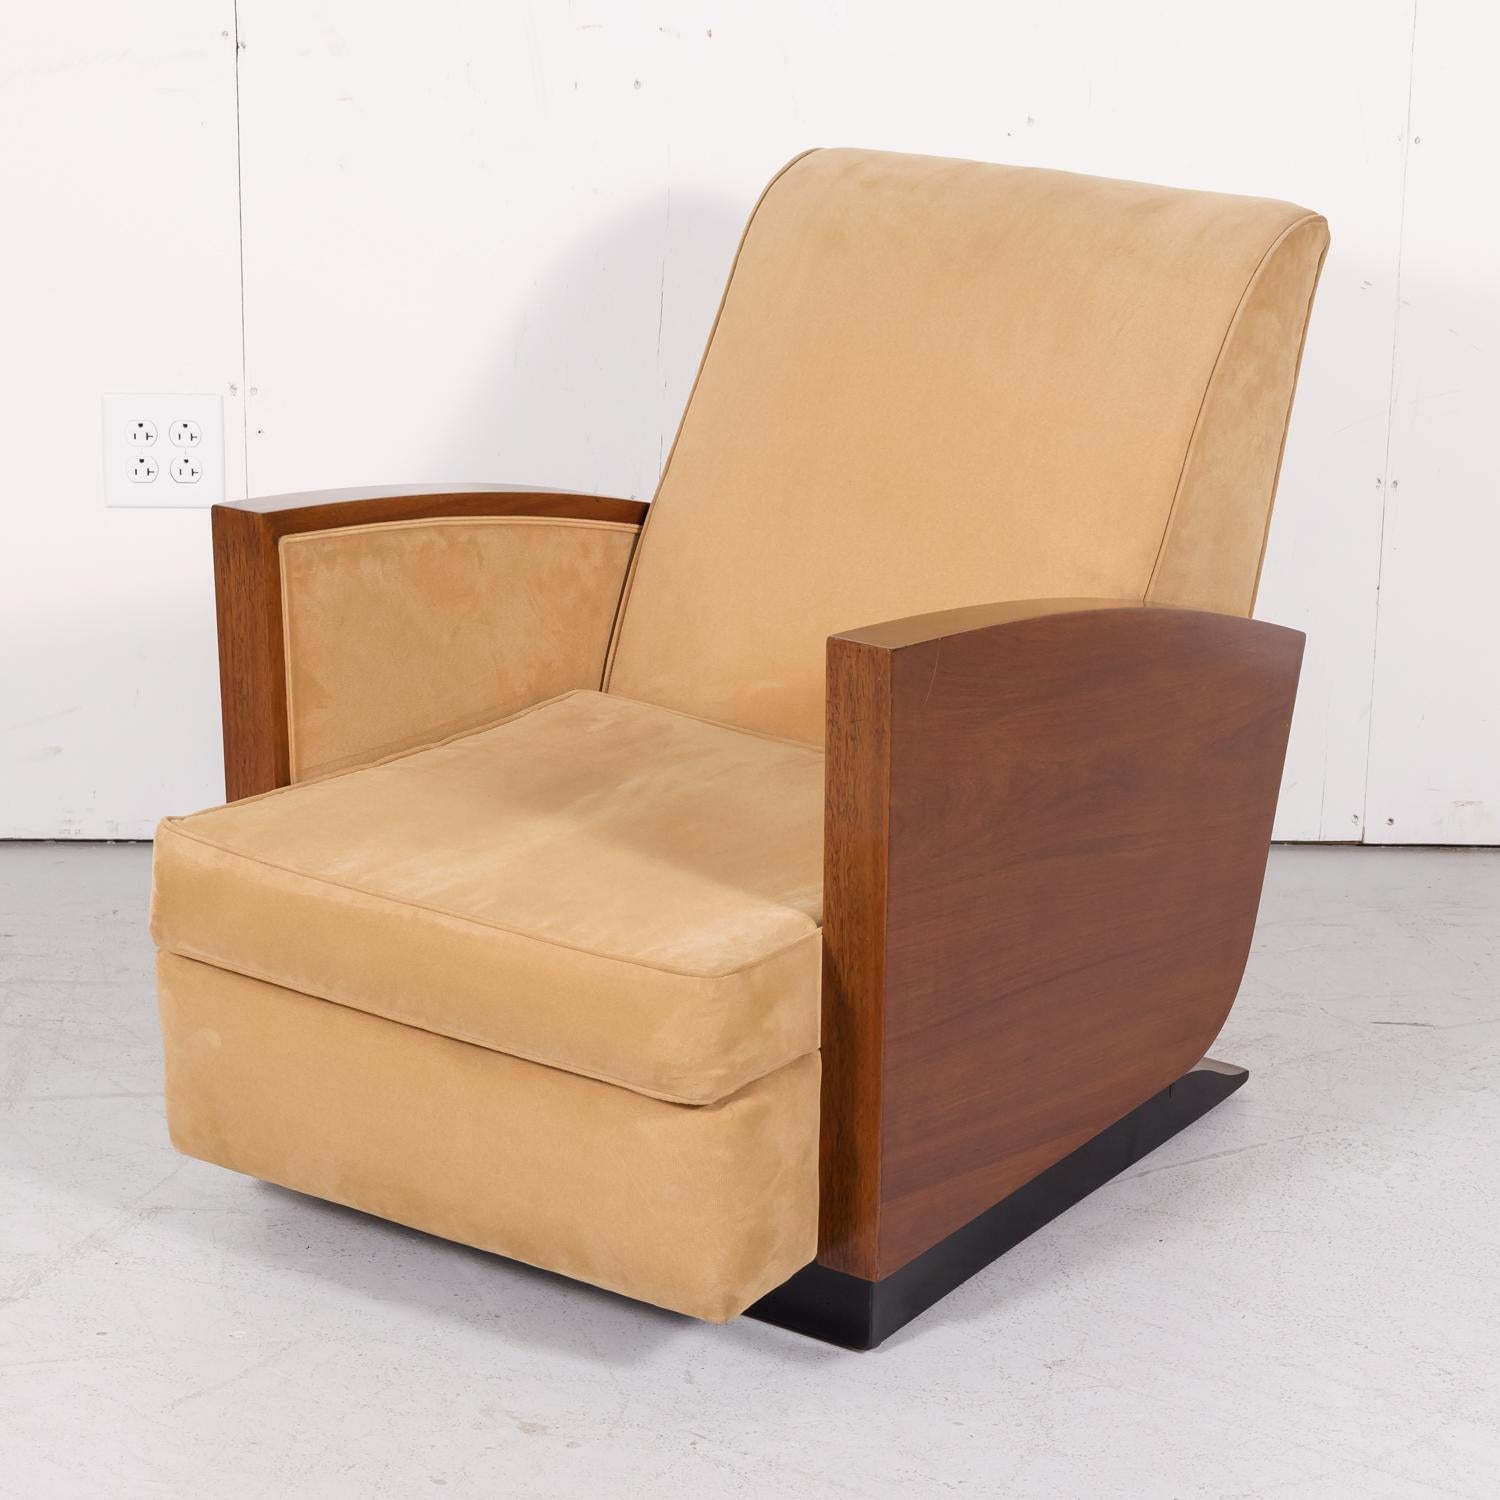 French Art Deco period armchair in walnut with a black lacquered base and ski slope arms, circa 1930s. Upholstered in a fine tan corduroy, this rare lounge chair with loose cushion is perhaps the most comfortable armchair we've ever had. The epitome